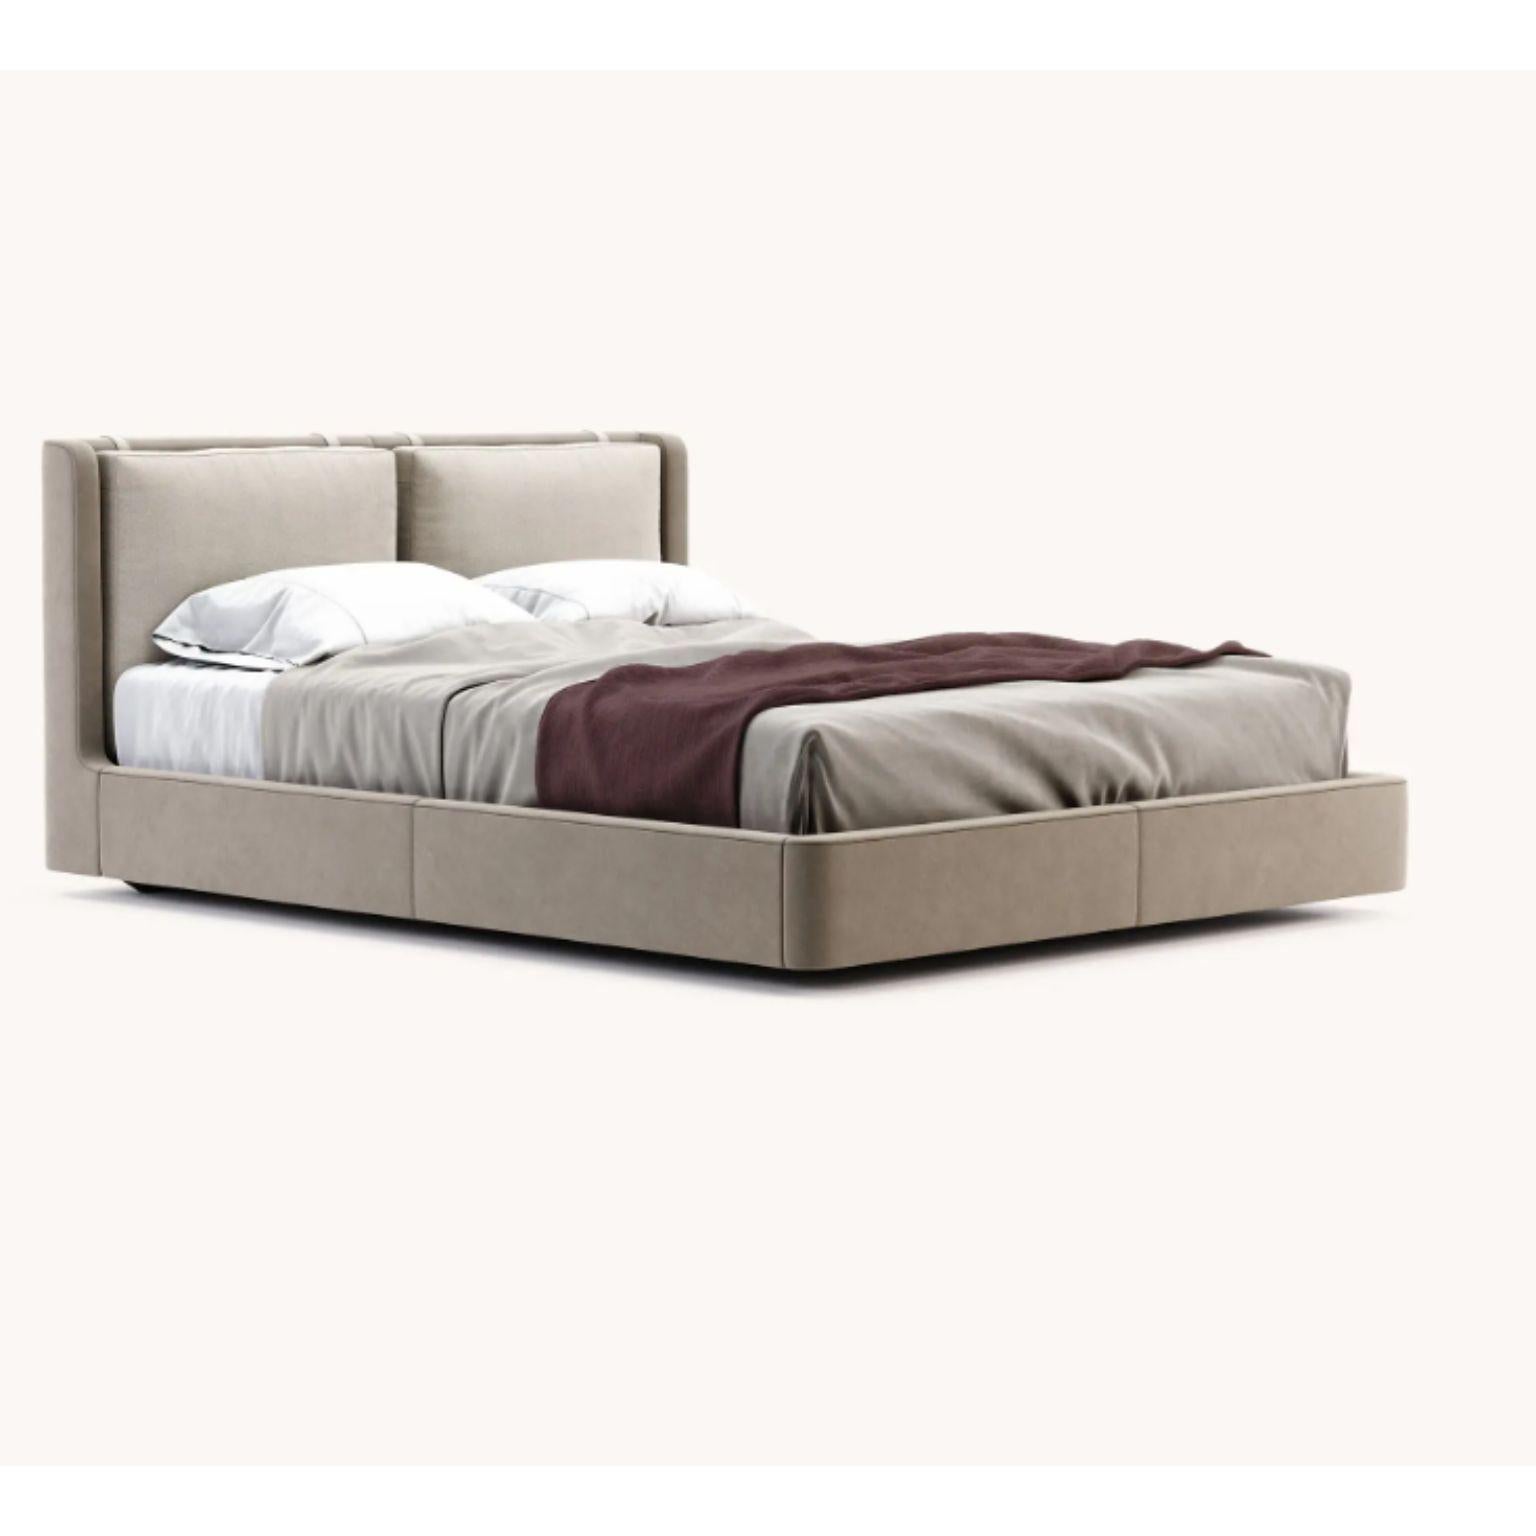 Queen Size Kelsi bed by Domkapa
Dimensions: W 168 x D 231 x H 95 cm.
Materials: Microfiber (Tarn 03), patterned fabric (Verdon 01), rose gold brushed. 
Also available in different materials.

Kelsi is an outstanding design and handcraft work,